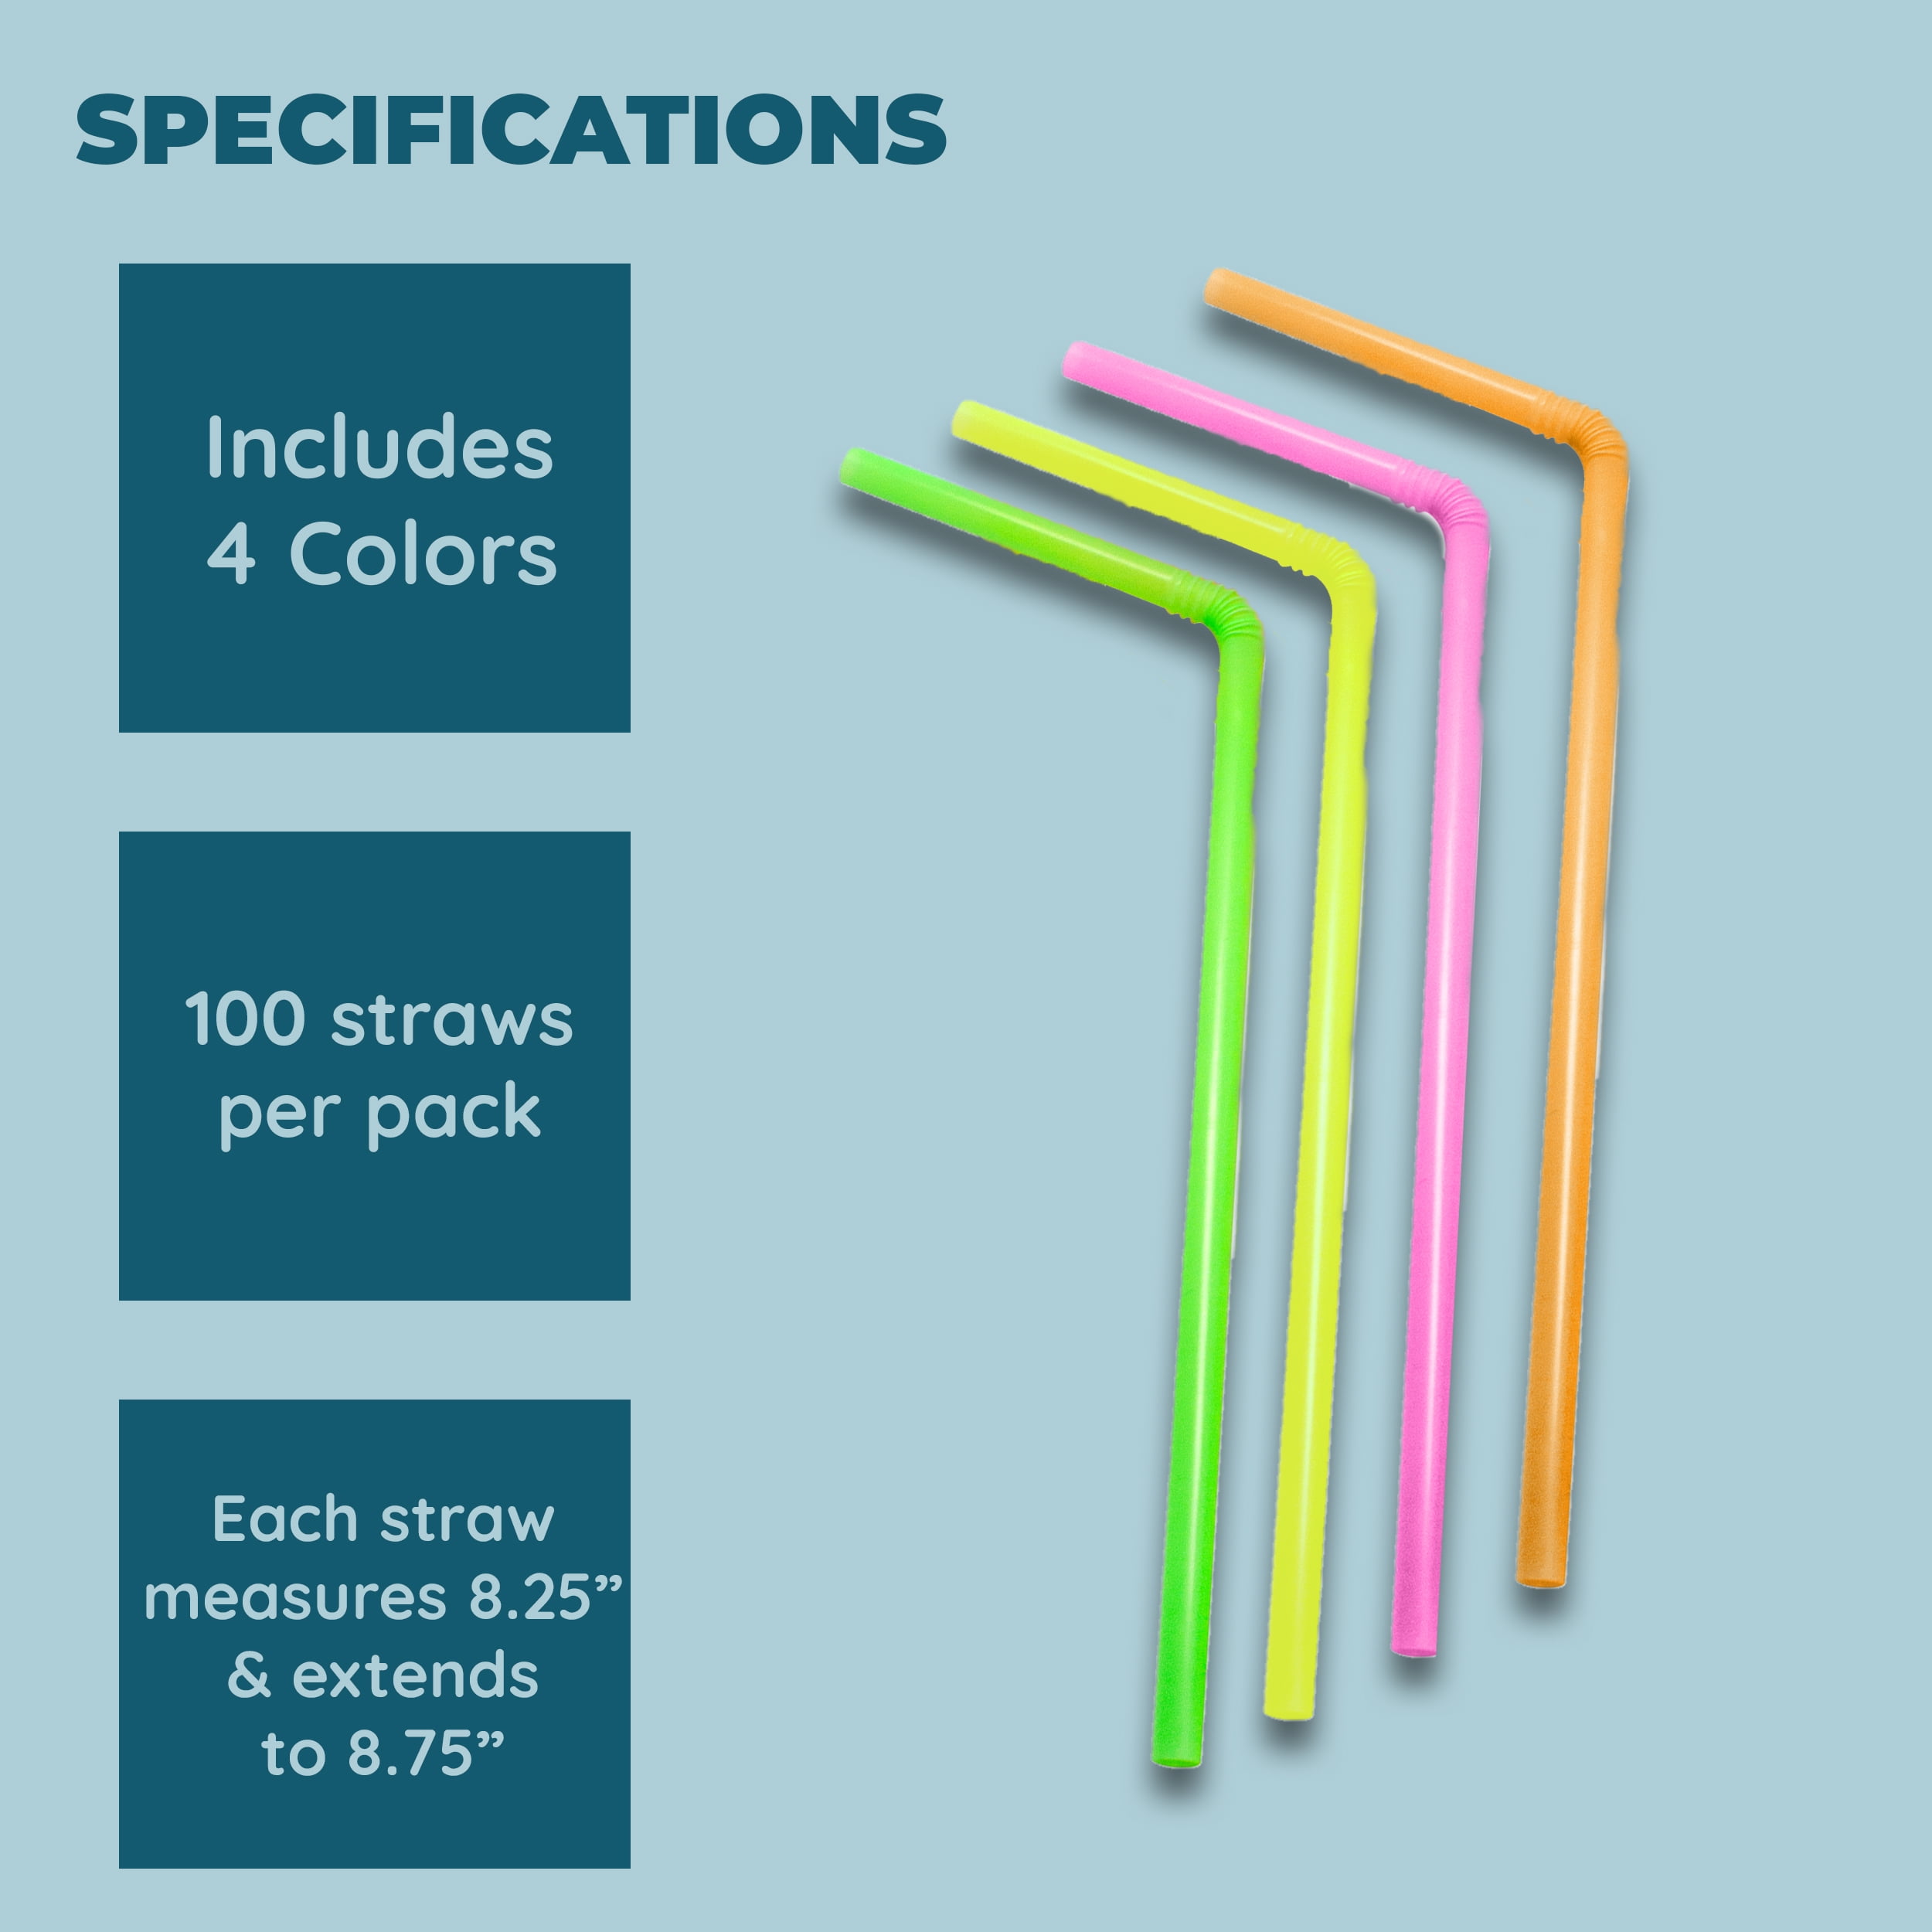 Colorful, Retro Blacklight Neon Drinking Straws 300pk. Individually  Wrapped, Sturdy 7.75 Inch in 4 Bright Colors for Party or Kids Birthday.  BPA-Free